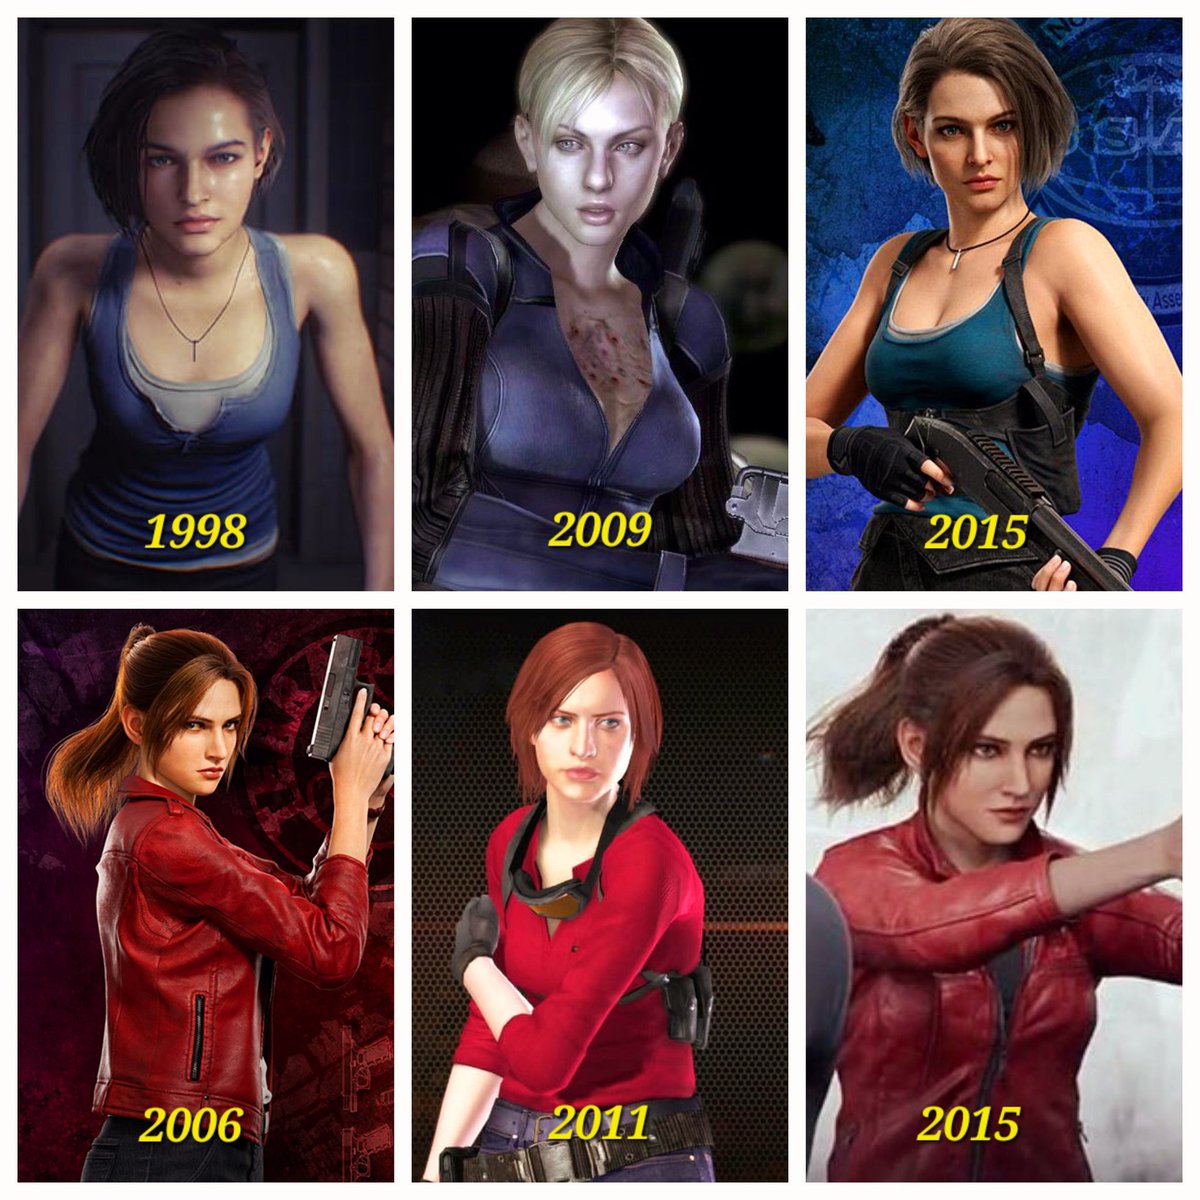 Never forget what they took from you.
#ResidentEvil #D_Island #JillValentine #ClaireRedfield #DeathIsland #InfiniteDarkness